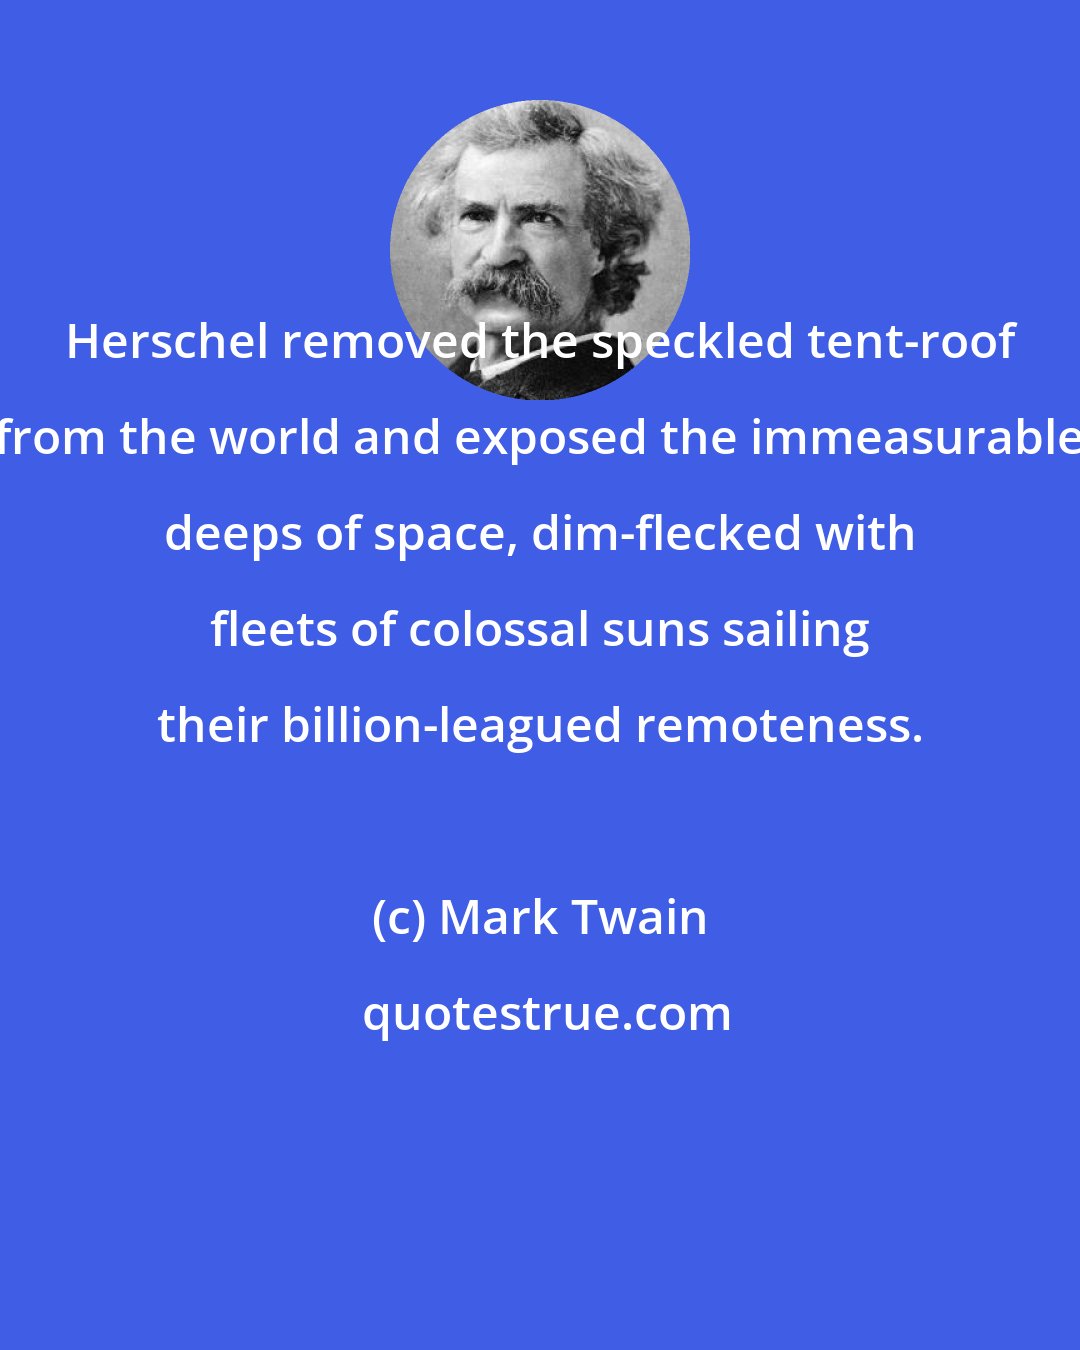 Mark Twain: Herschel removed the speckled tent-roof from the world and exposed the immeasurable deeps of space, dim-flecked with fleets of colossal suns sailing their billion-leagued remoteness.